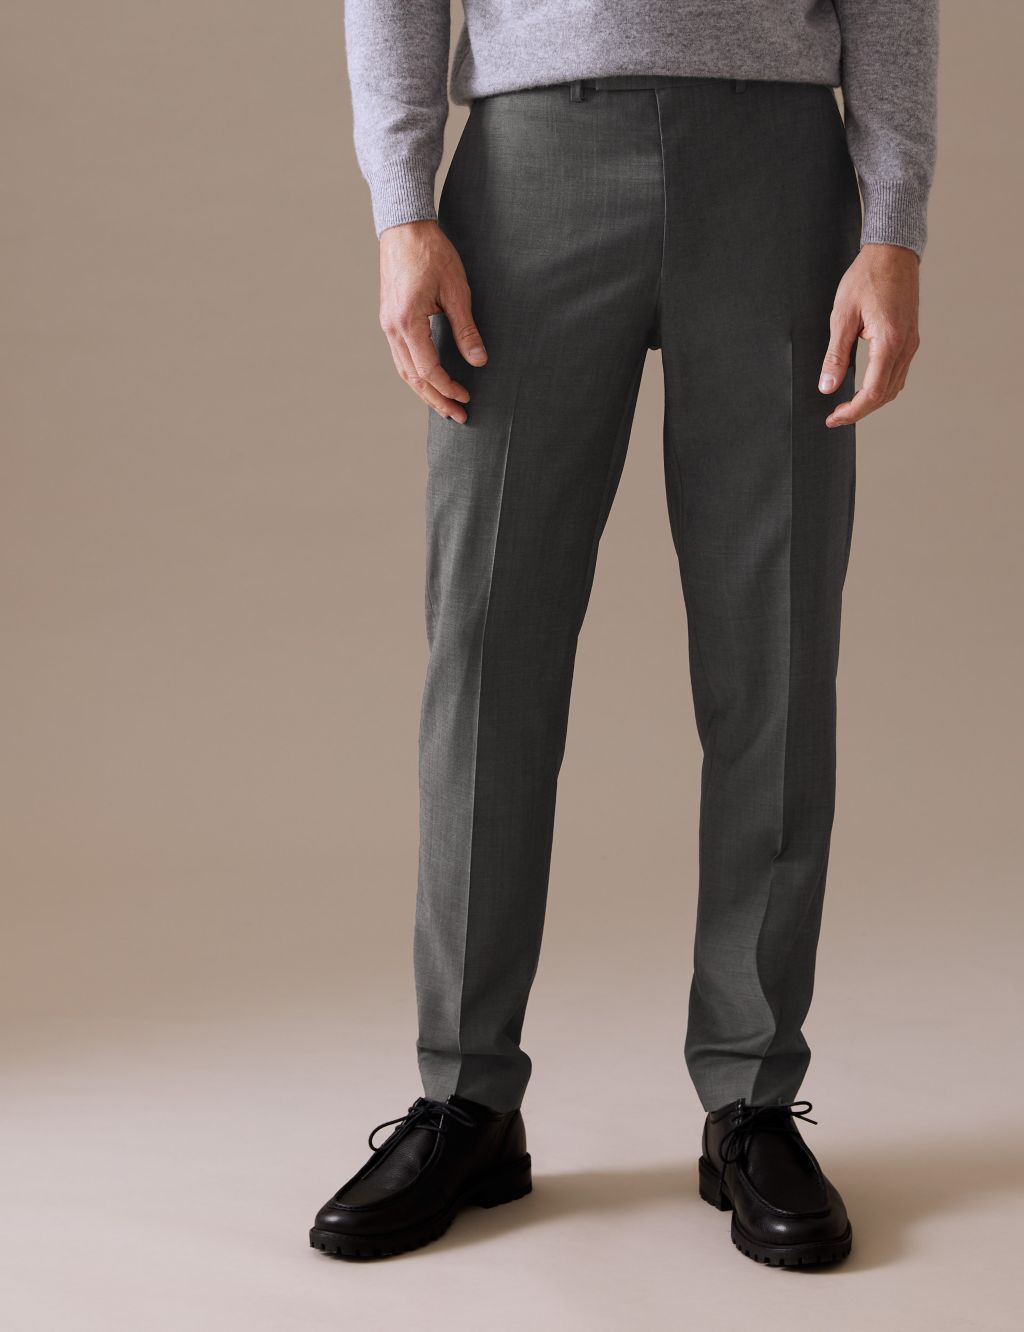 Tailored Fit Pure Wool Twill Suit image 5